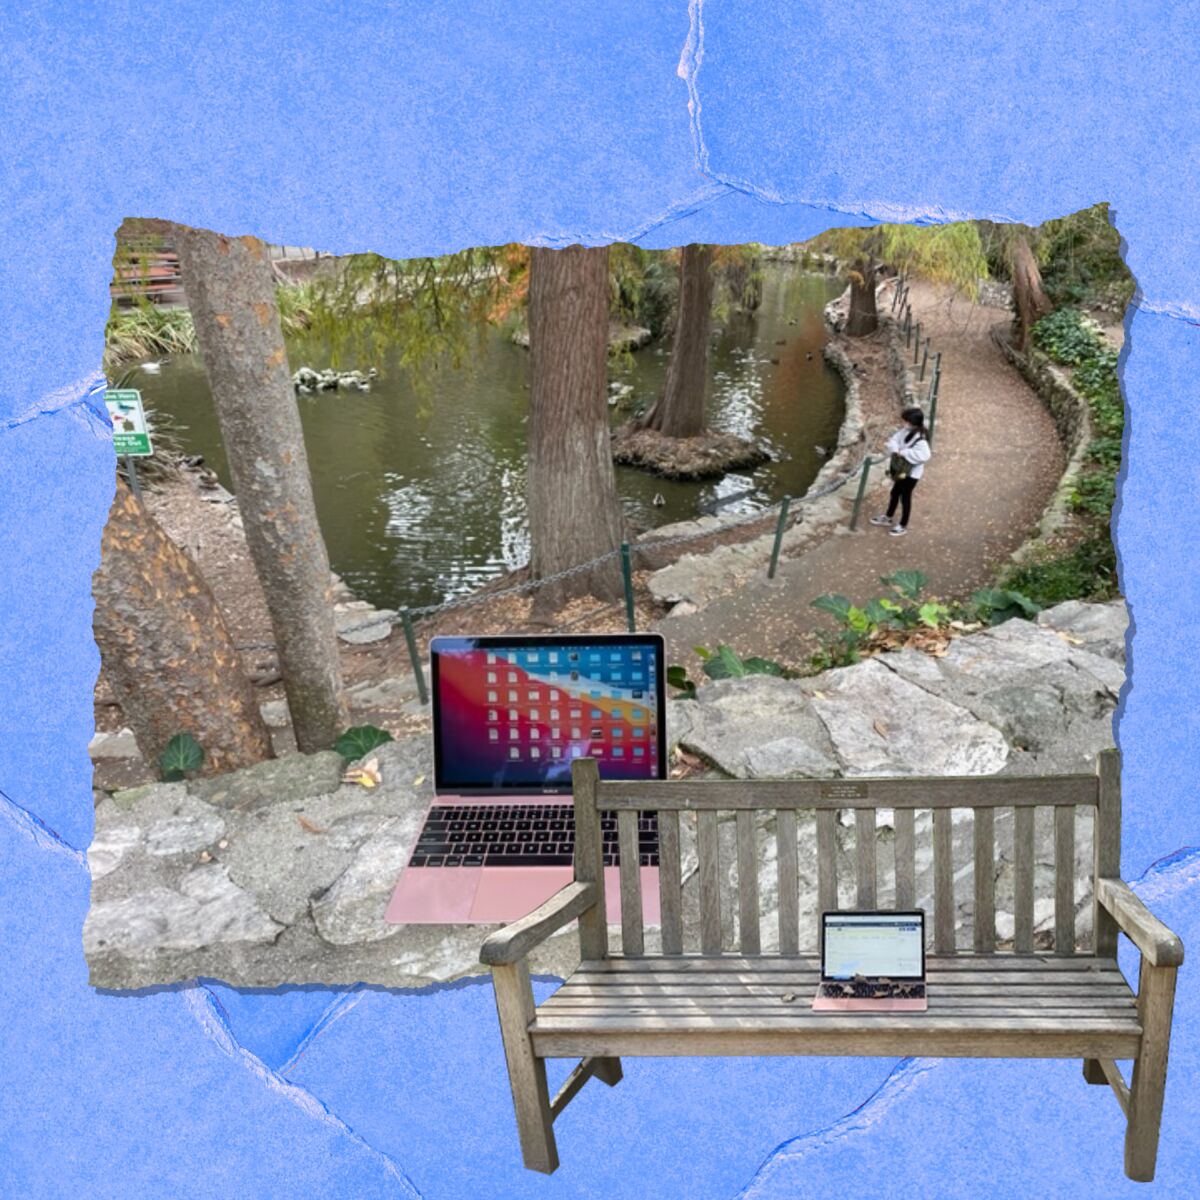 An illustration with a photo of a laptop on a park bench and another of a laptop on a rock ledge that overlooks a path.